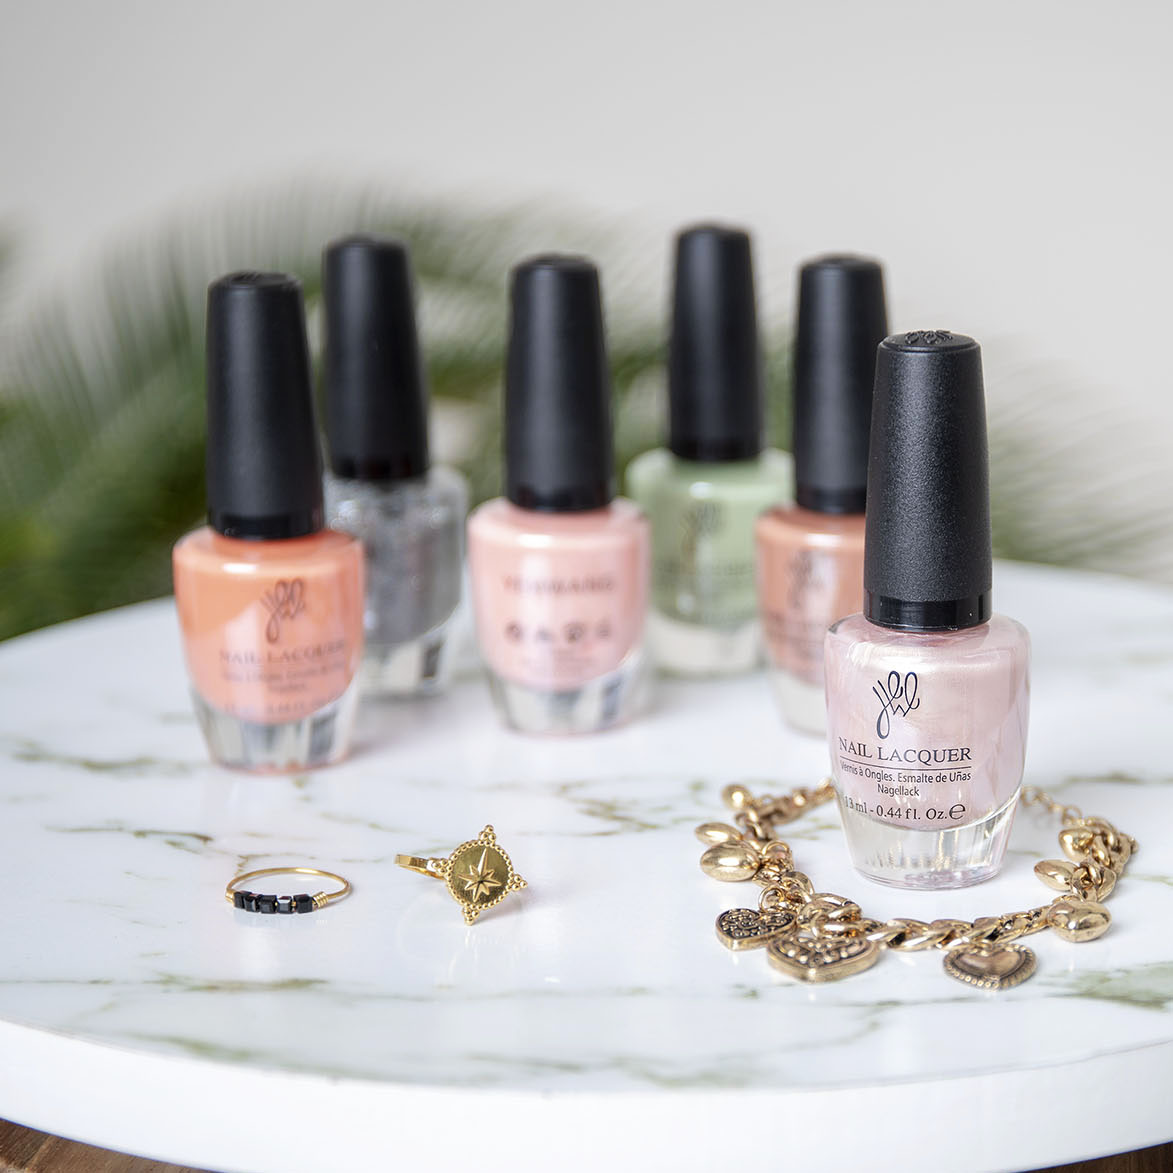 The perfect nail polish colors for this summer/spring